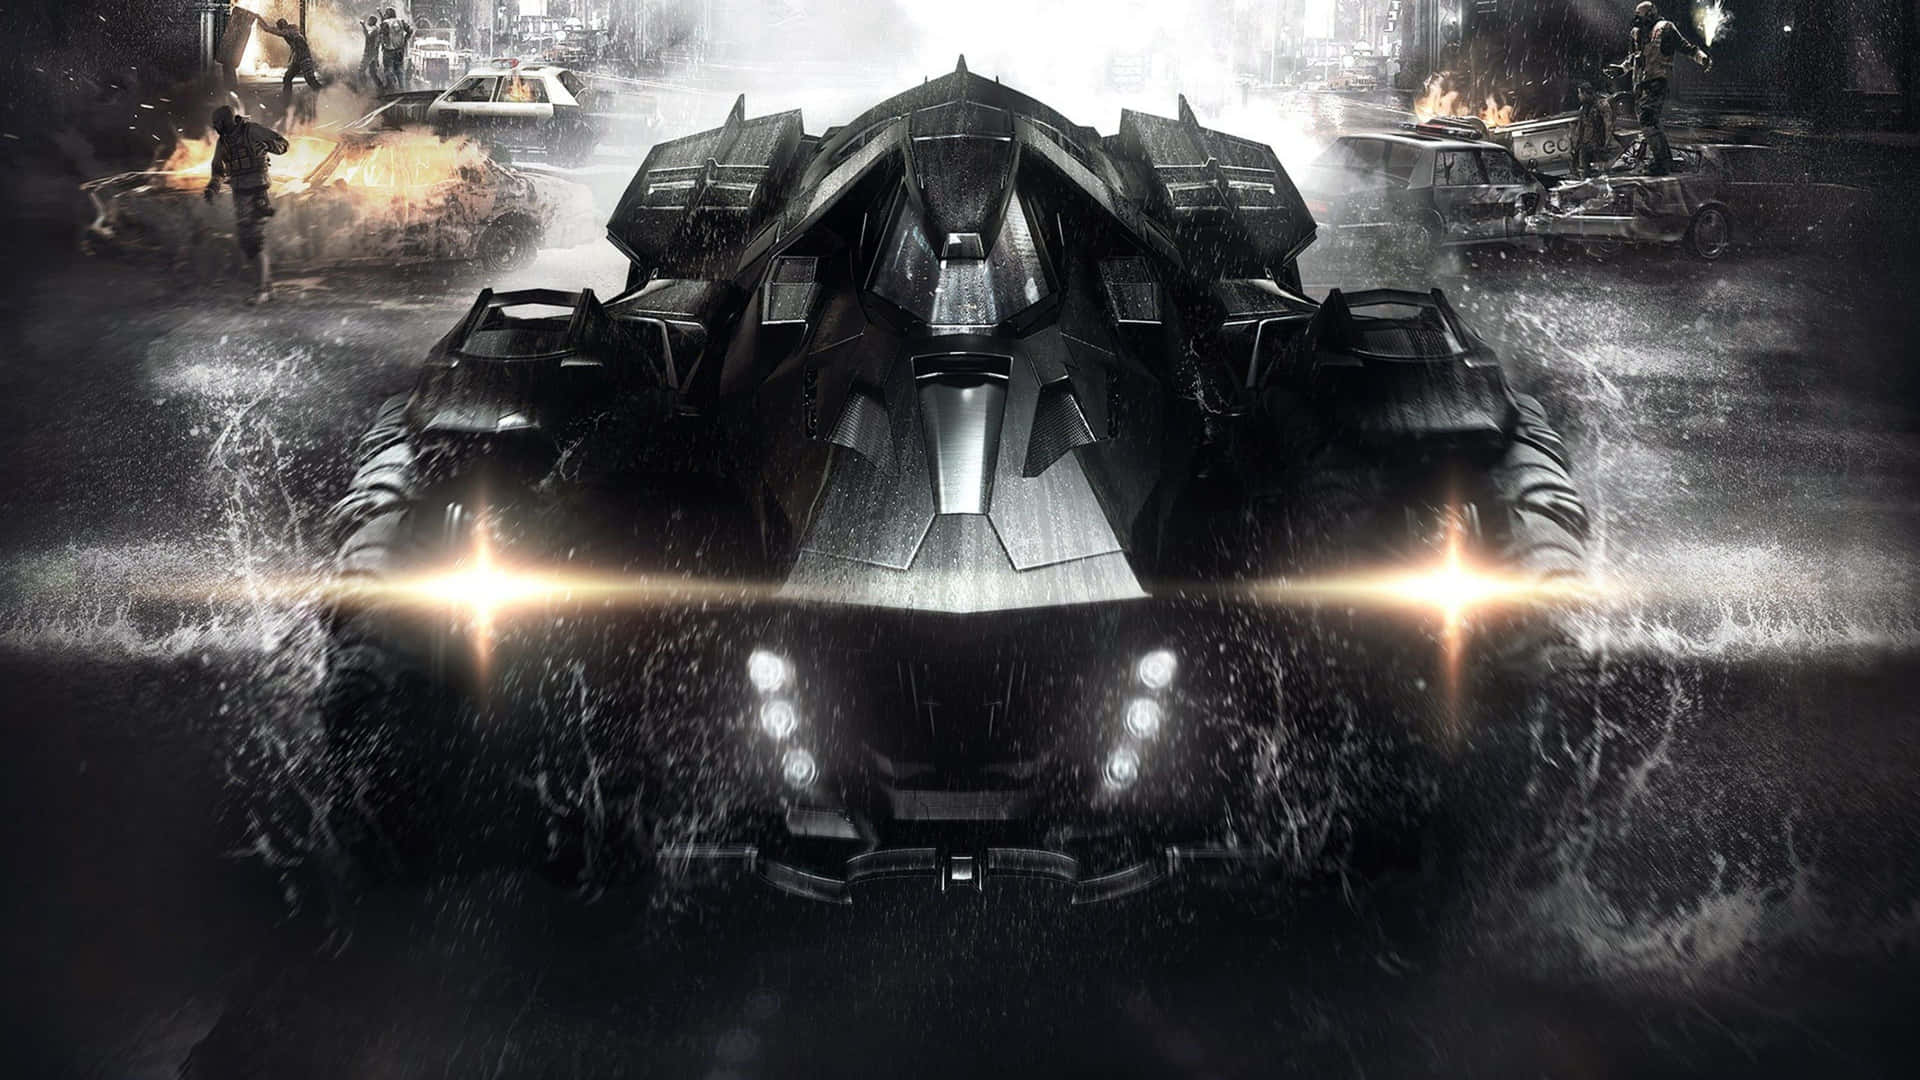 Rule the night in style and speed with the iconic 4k Batmobile.